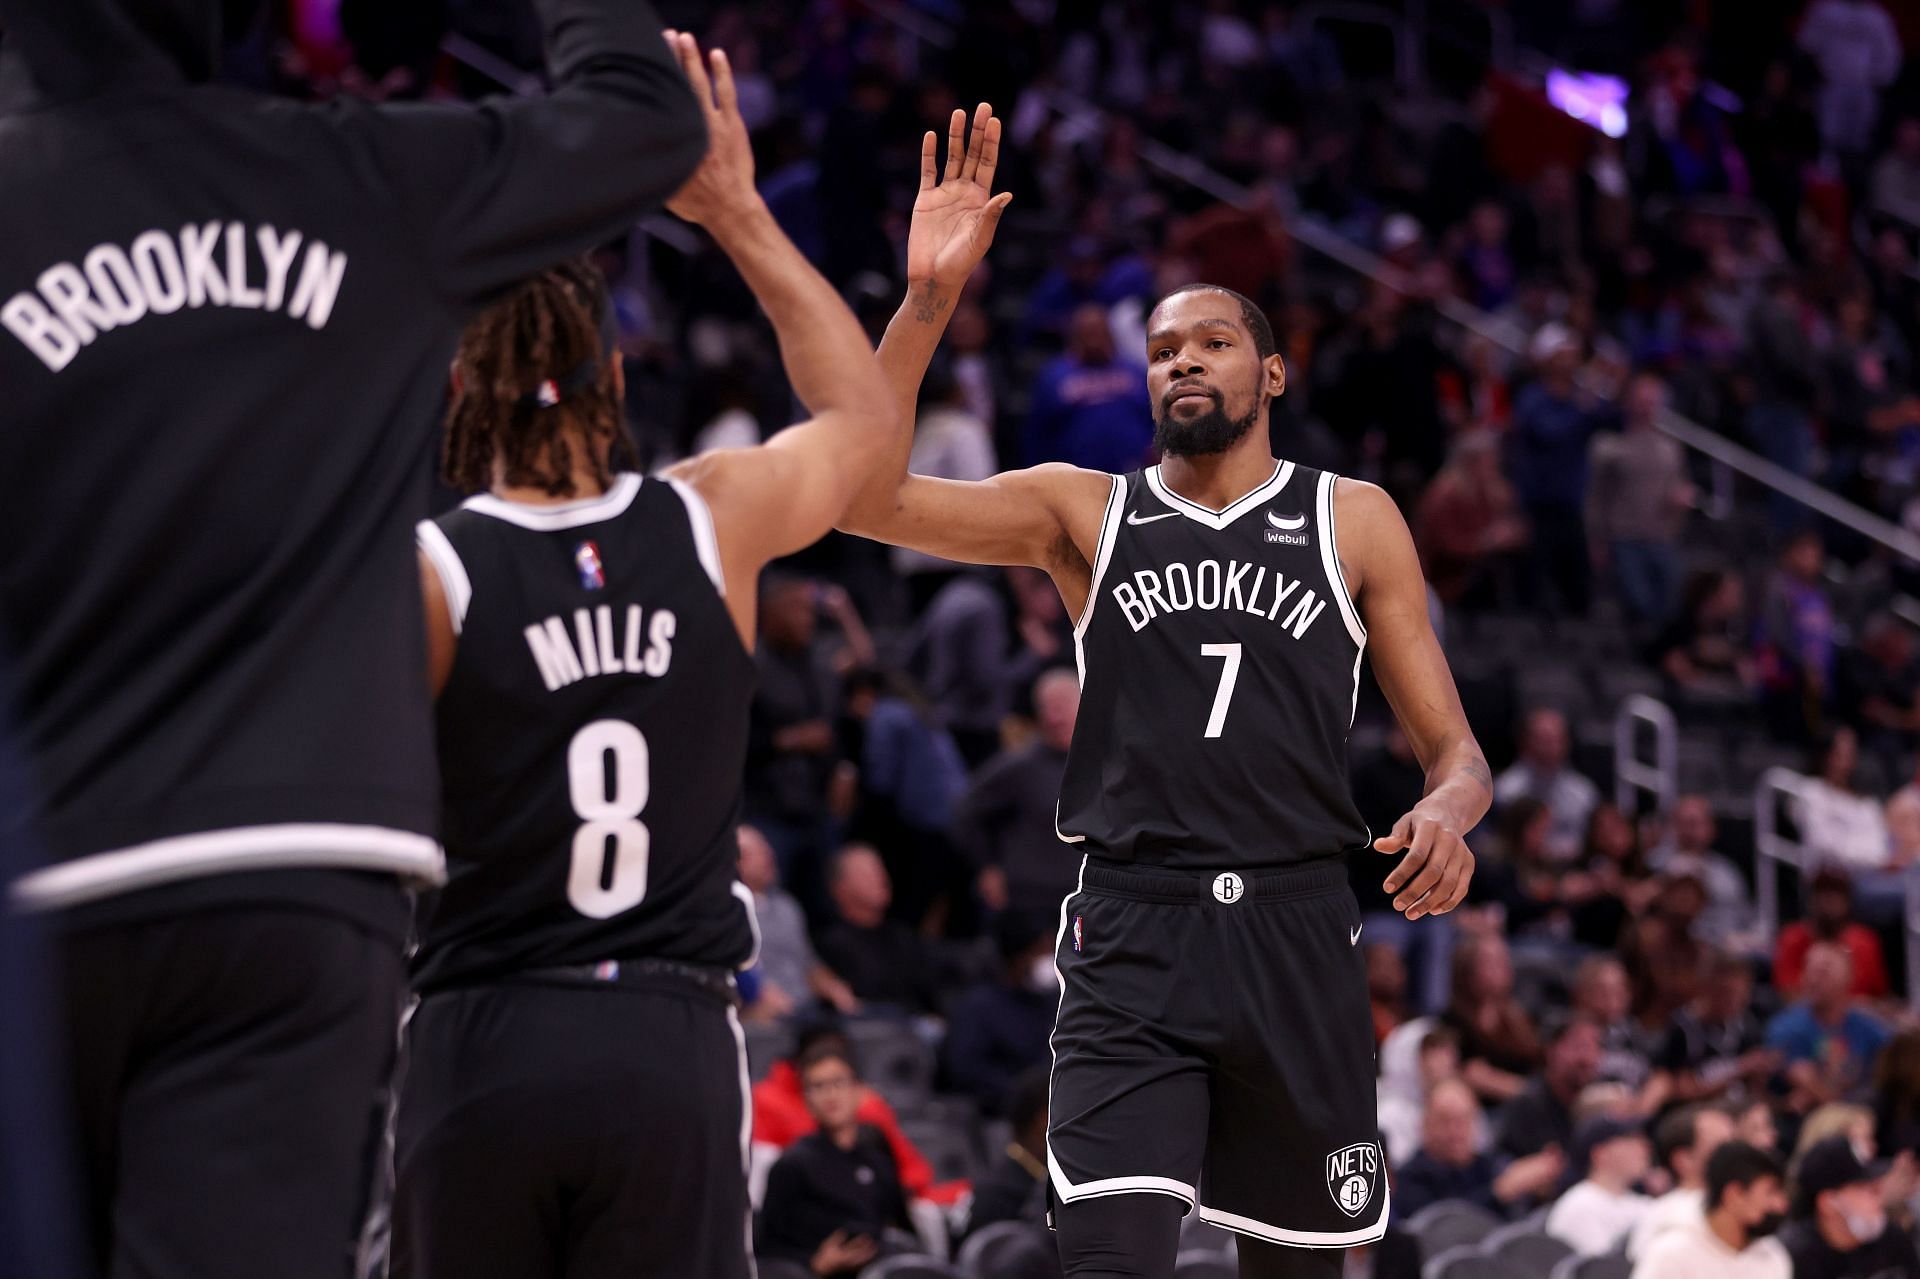 The Brooklyn Nets celebrate a play during a game against the Detroit Pistons.